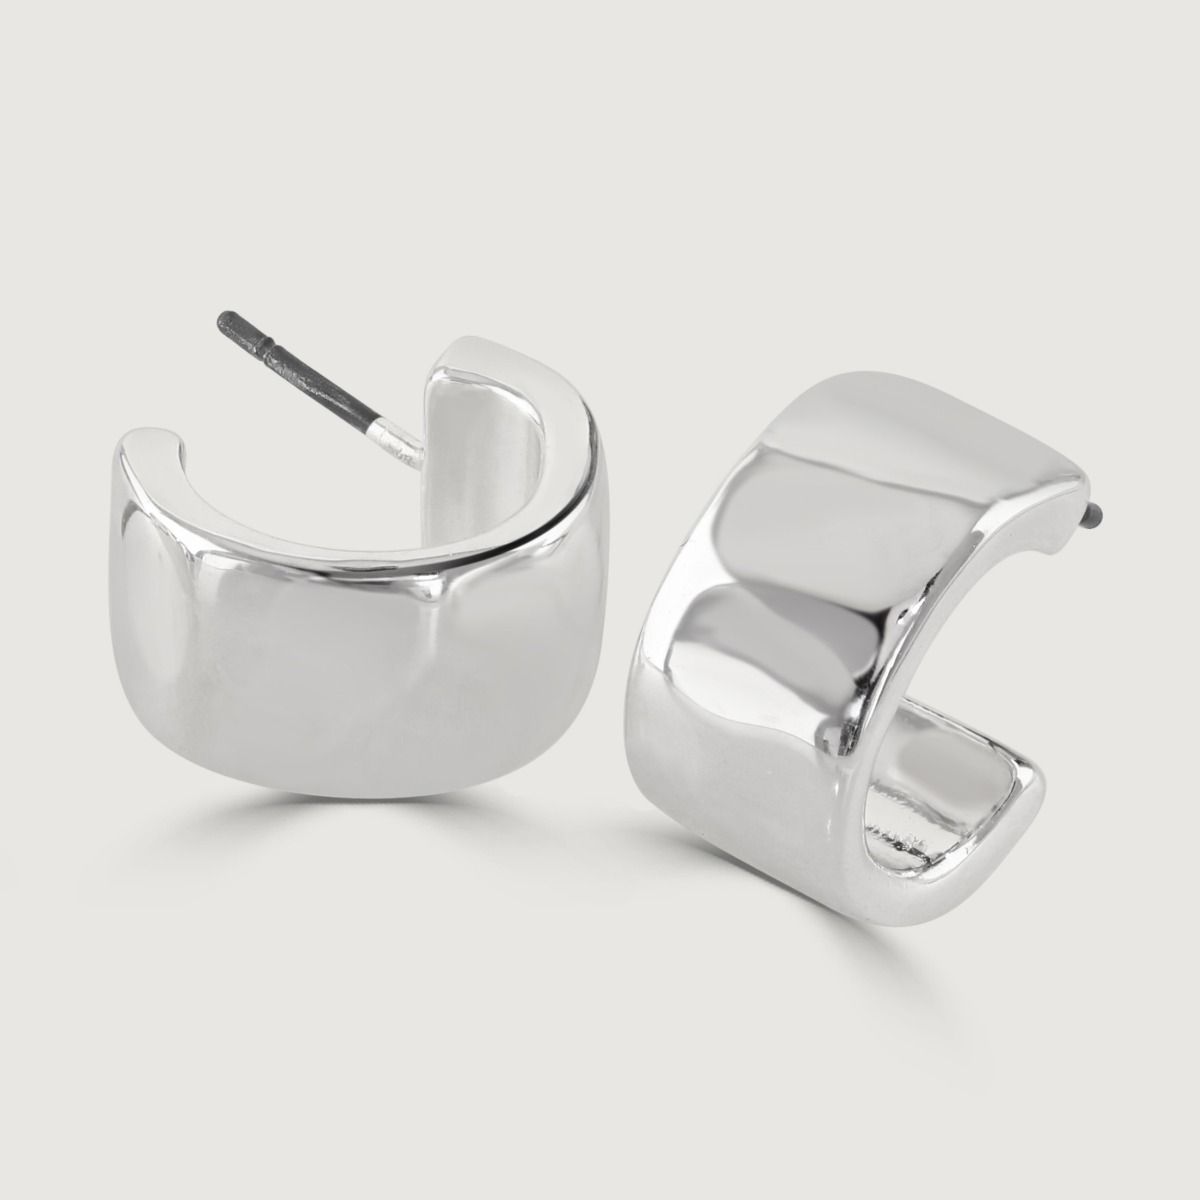 The Set of Two Silver Stud Earrings is a versatile piece. Crafted with precision and care, these earrings feature a sleek silver finish that exudes elegance. With two different designs in the set, they offer versatility to suit any occasion and add a touc